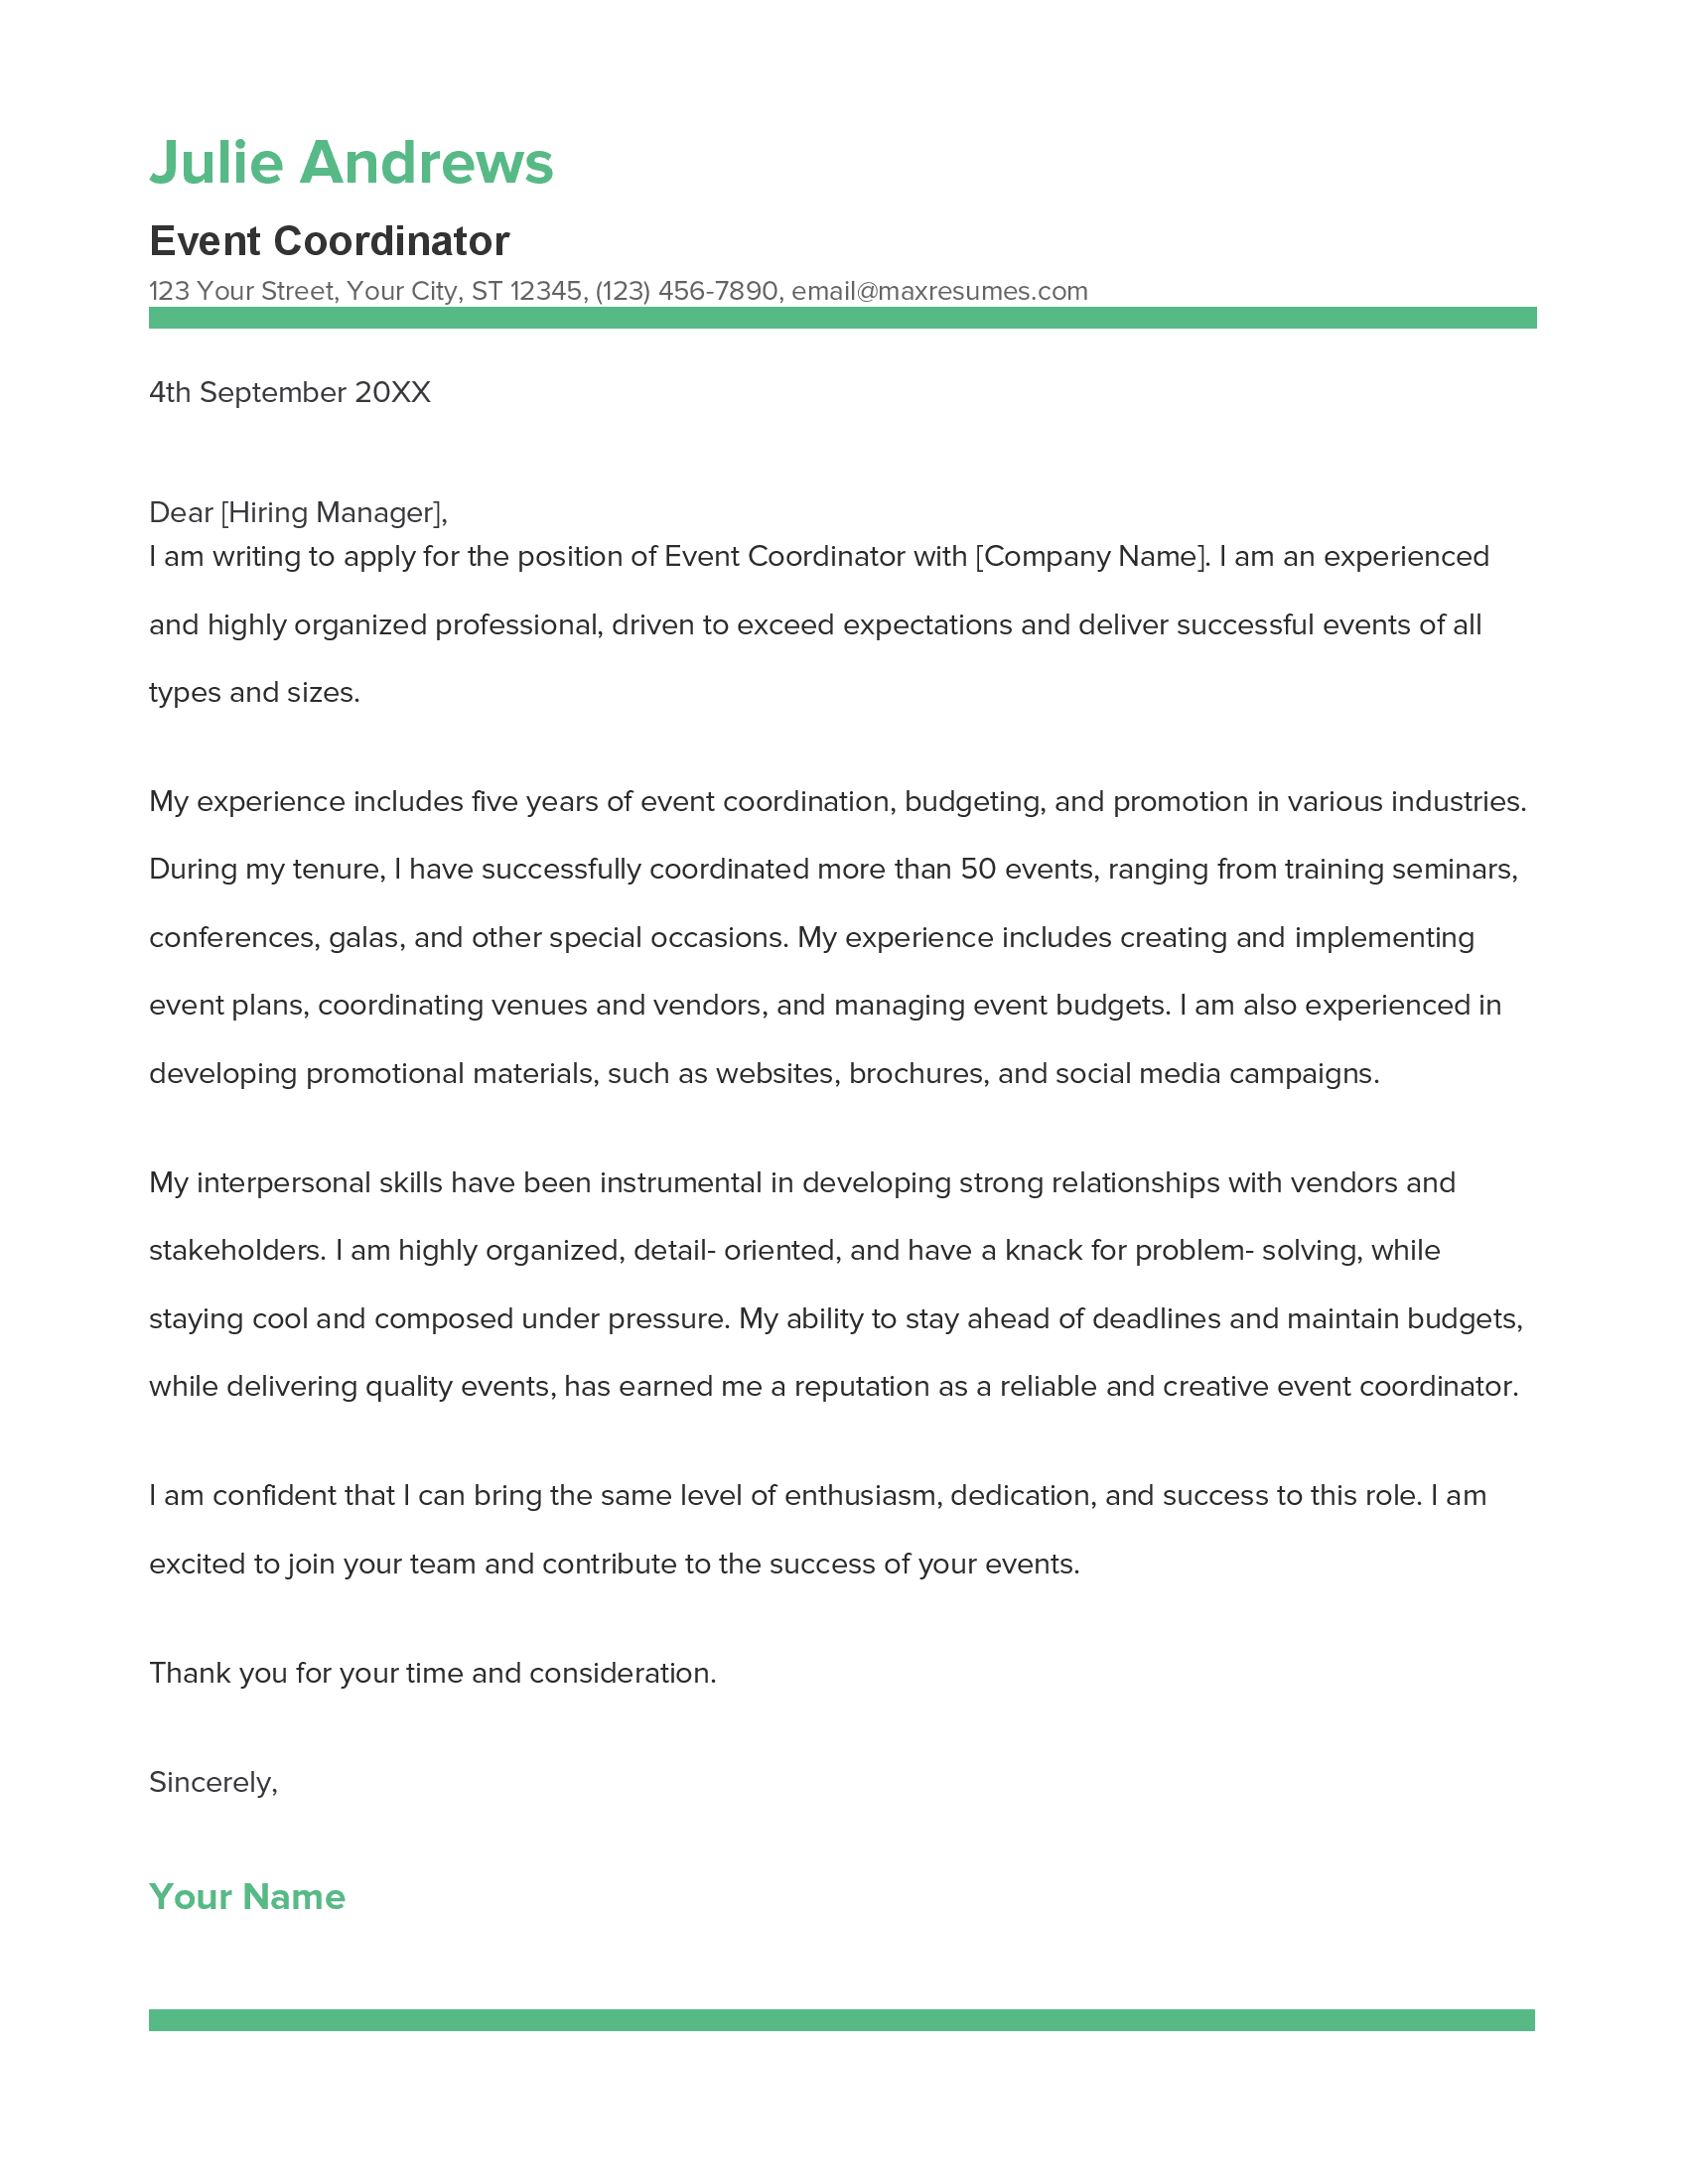 Event Coordinator Cover Letter Example